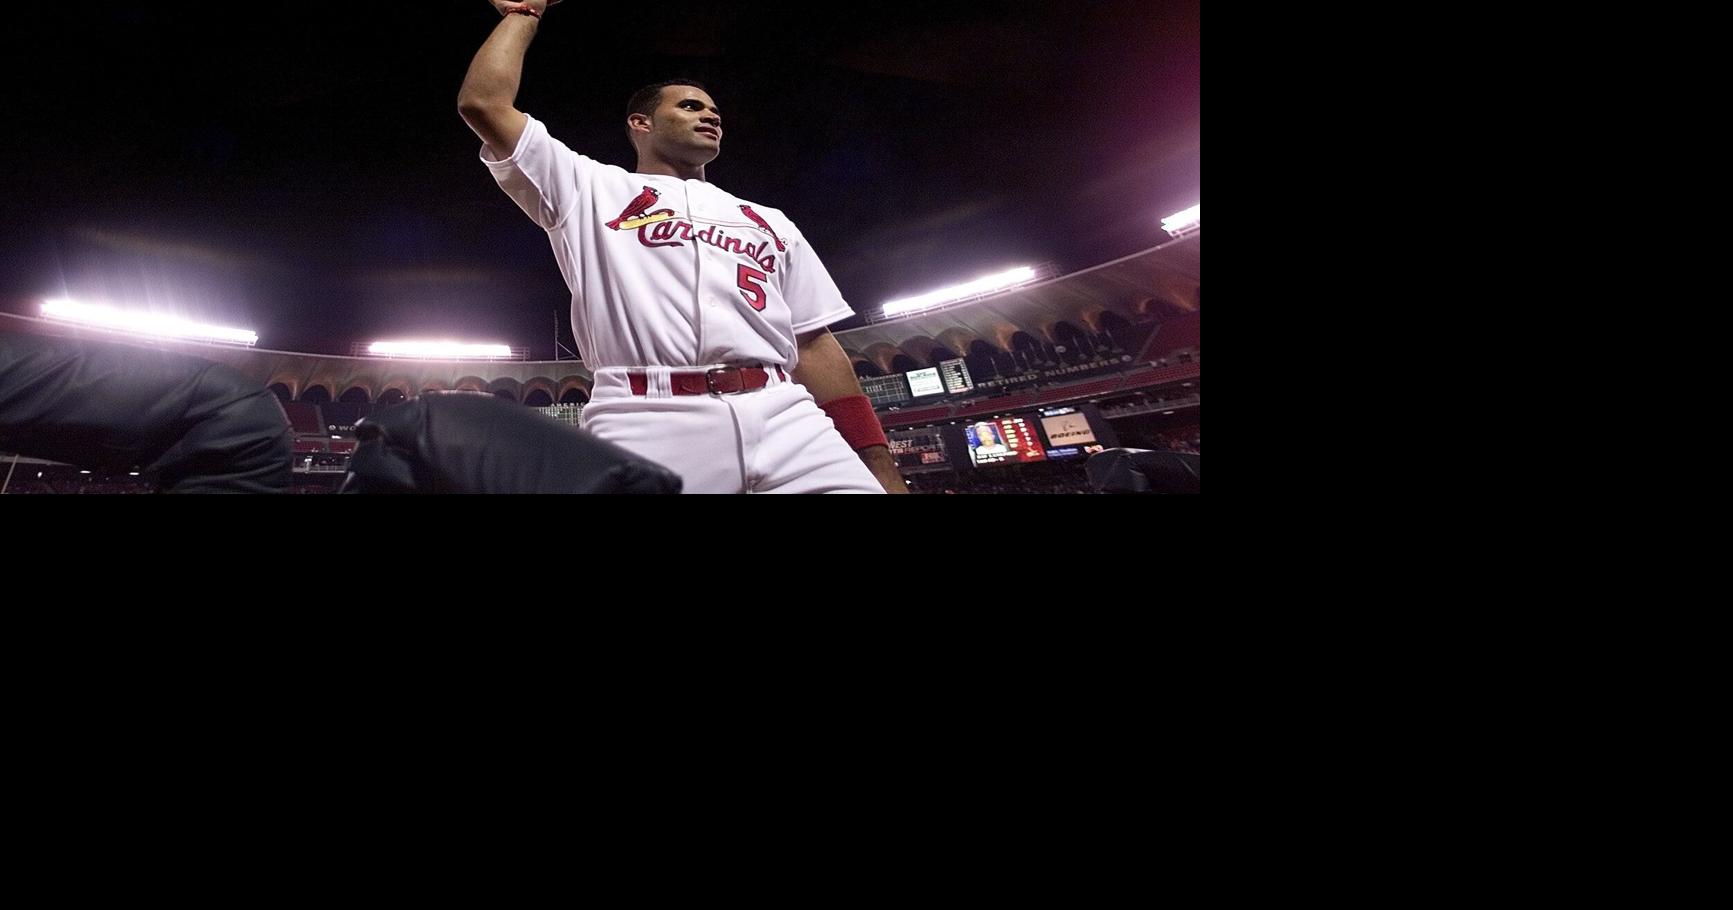 Hitting out loud: Cardinals icon Albert Pujols' incomparable